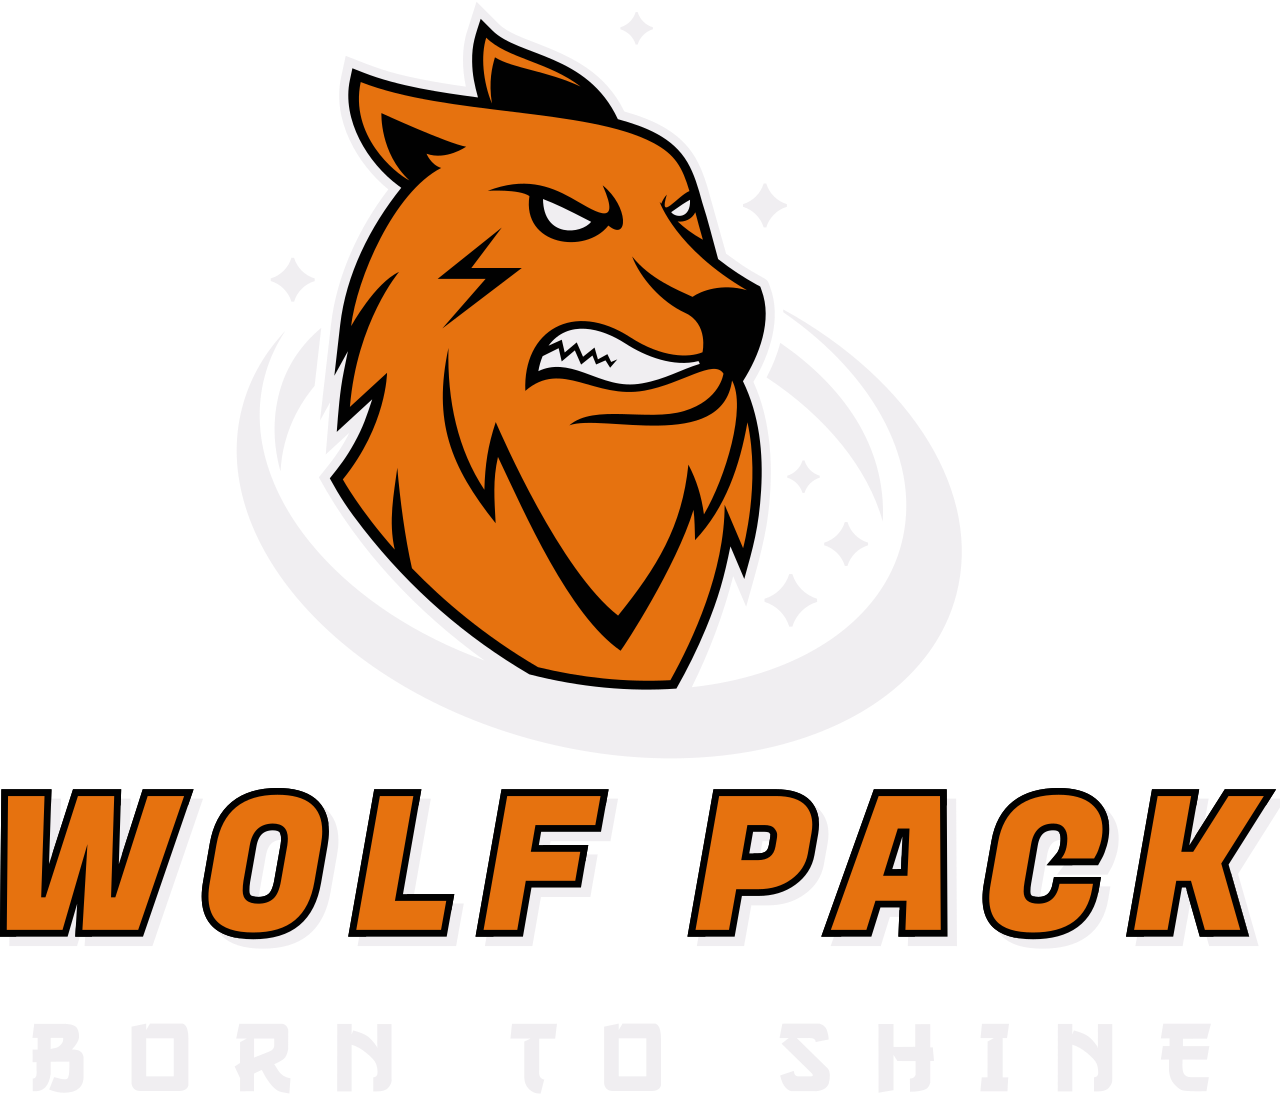 Wolf Pack's web page